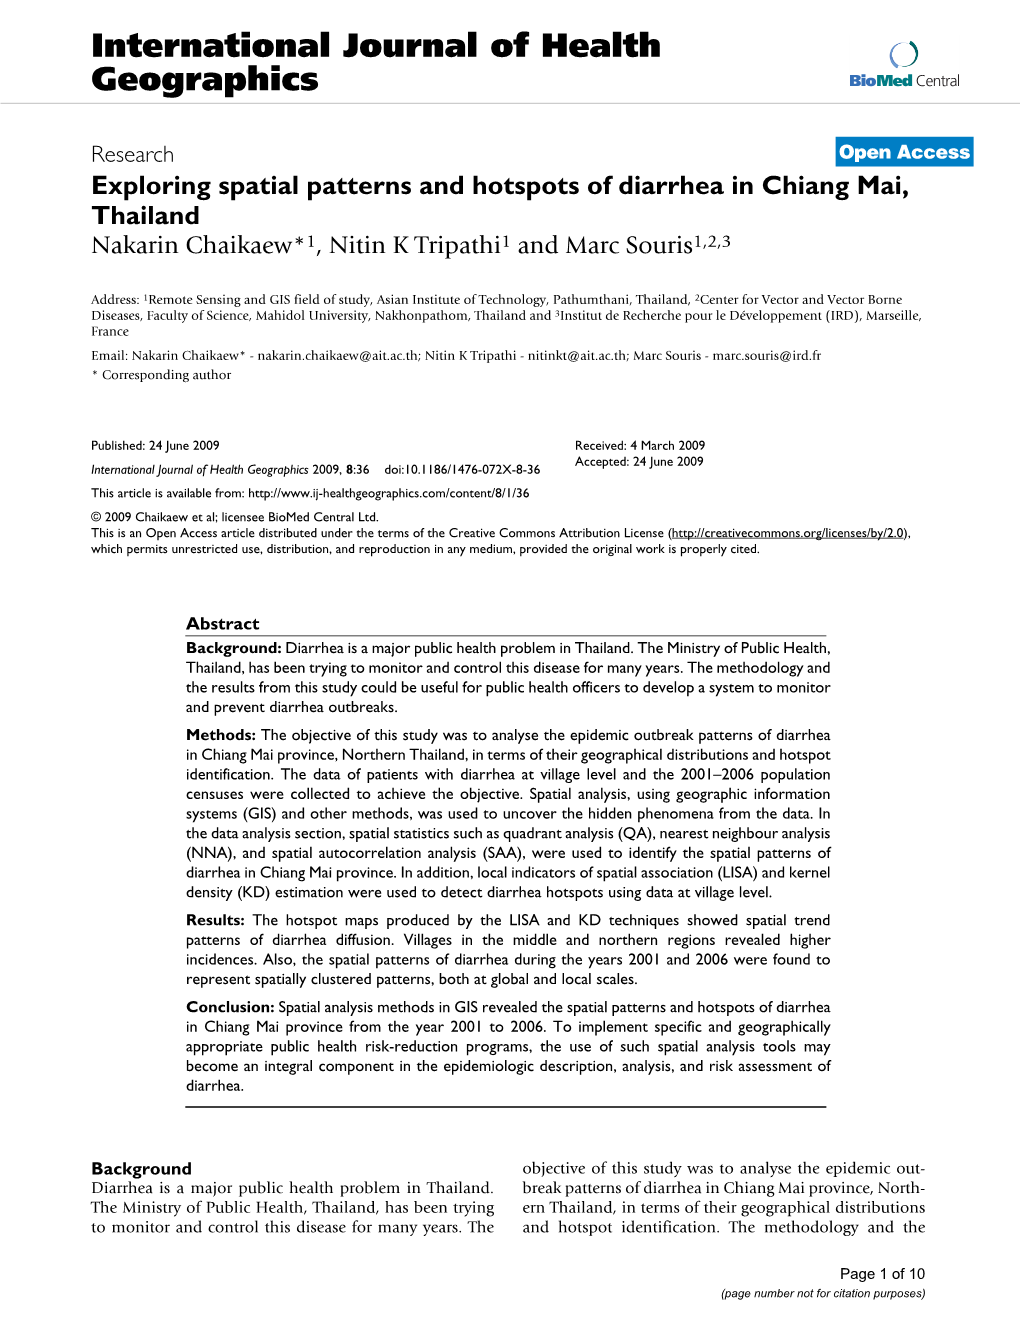 Exploring Spatial Patterns and Hotspots of Diarrhea in Chiang Mai, Thailand Nakarin Chaikaew*1, Nitin K Tripathi1 and Marc Souris1,2,3